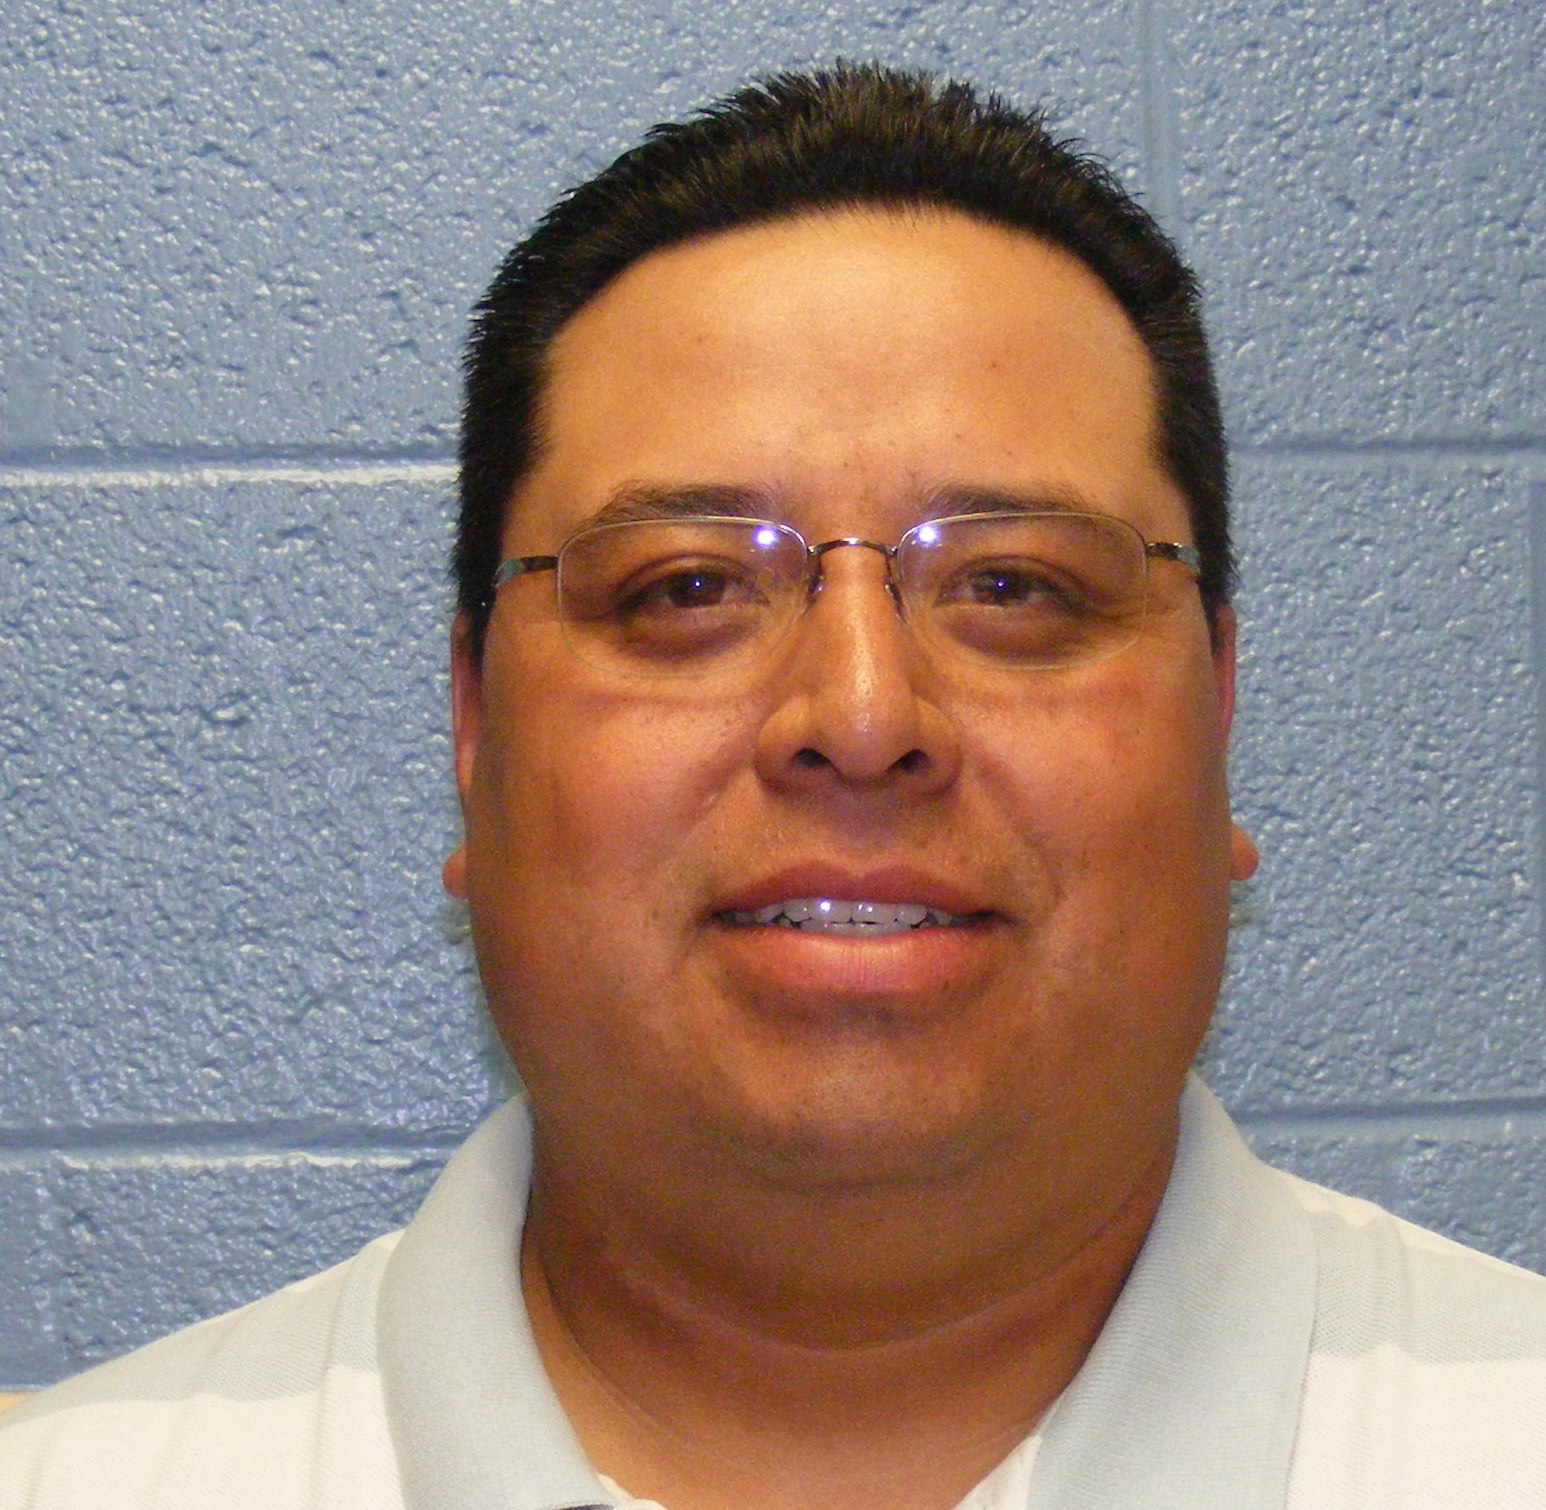 <b>Carlos Guerra</b> will become the new Director of Transportation on September 1. - Carlos